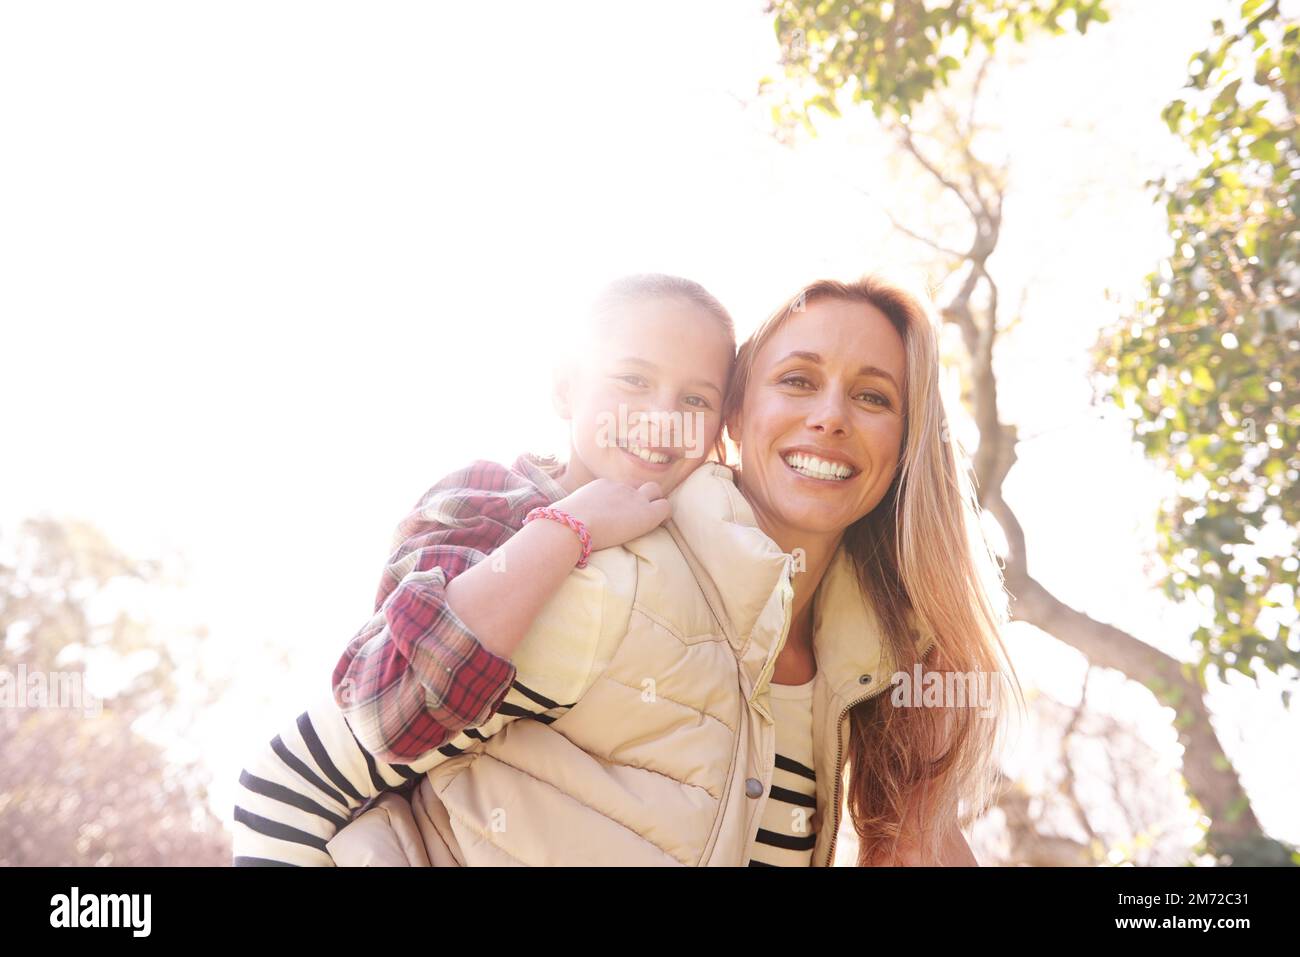 Happy moments together. A happy mother and daughter spending time together outdoors. Stock Photo